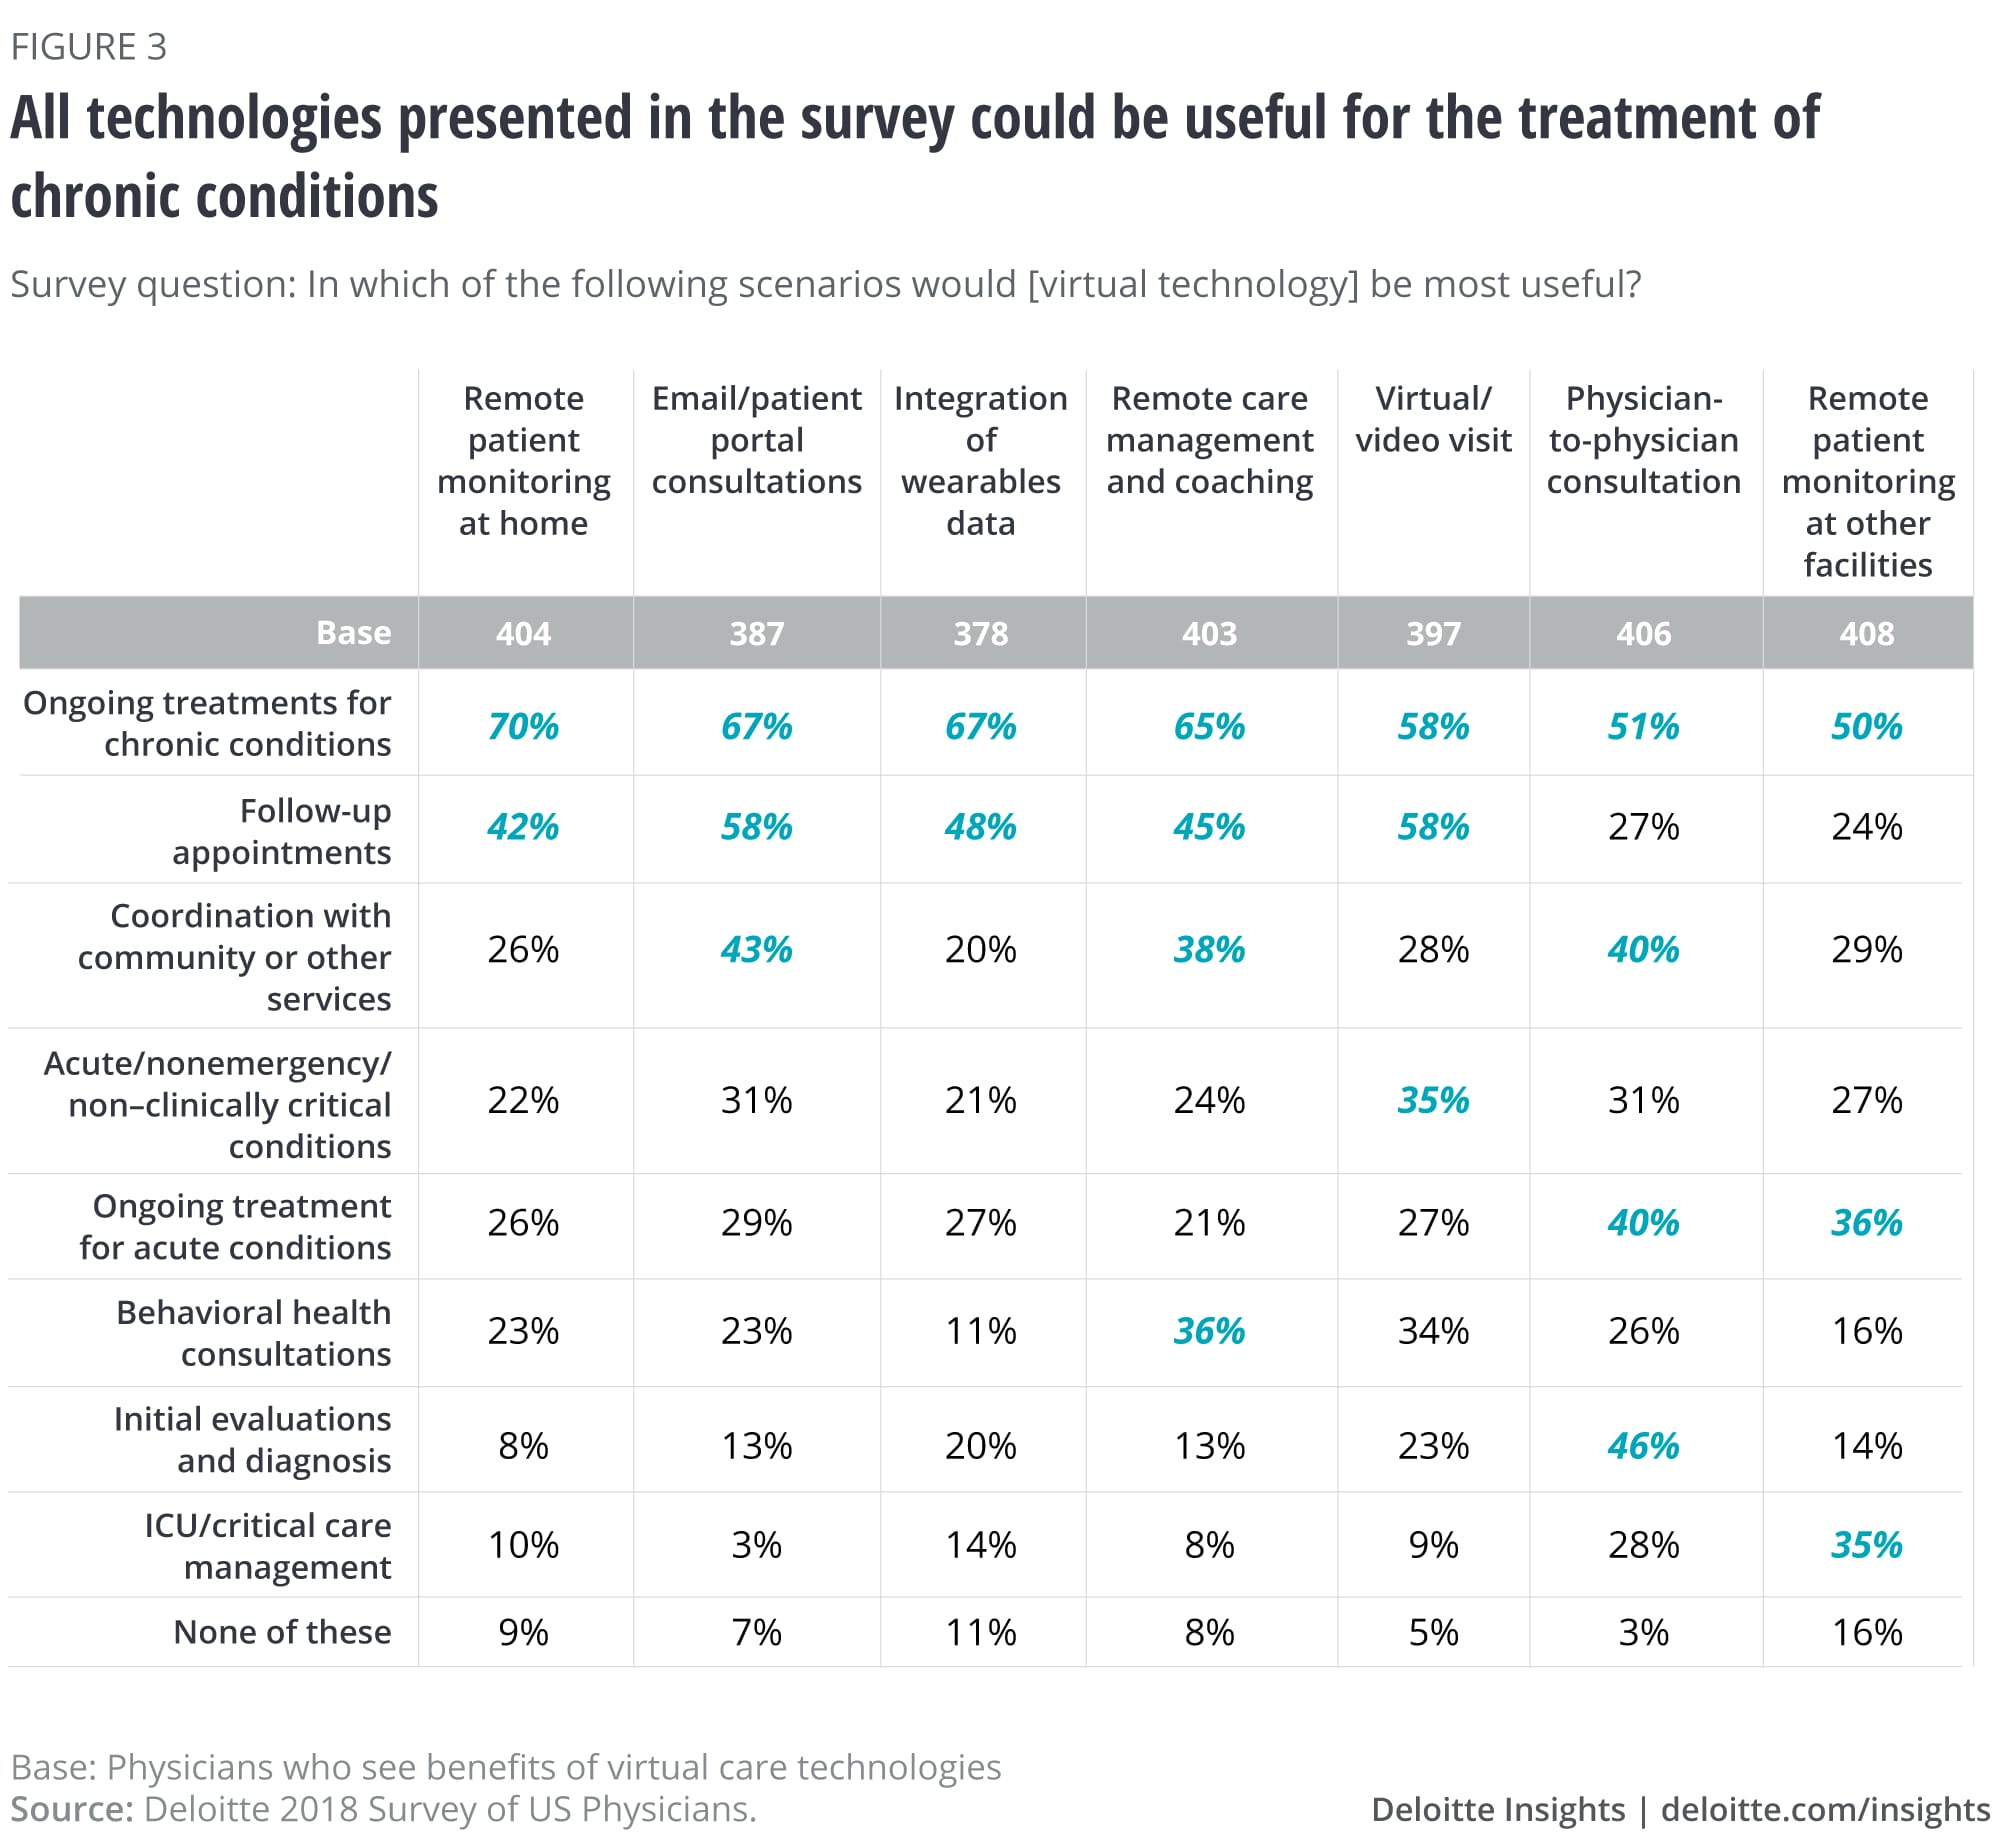 All technologies presented in the survey could be useful for the treatment of chronic conditions